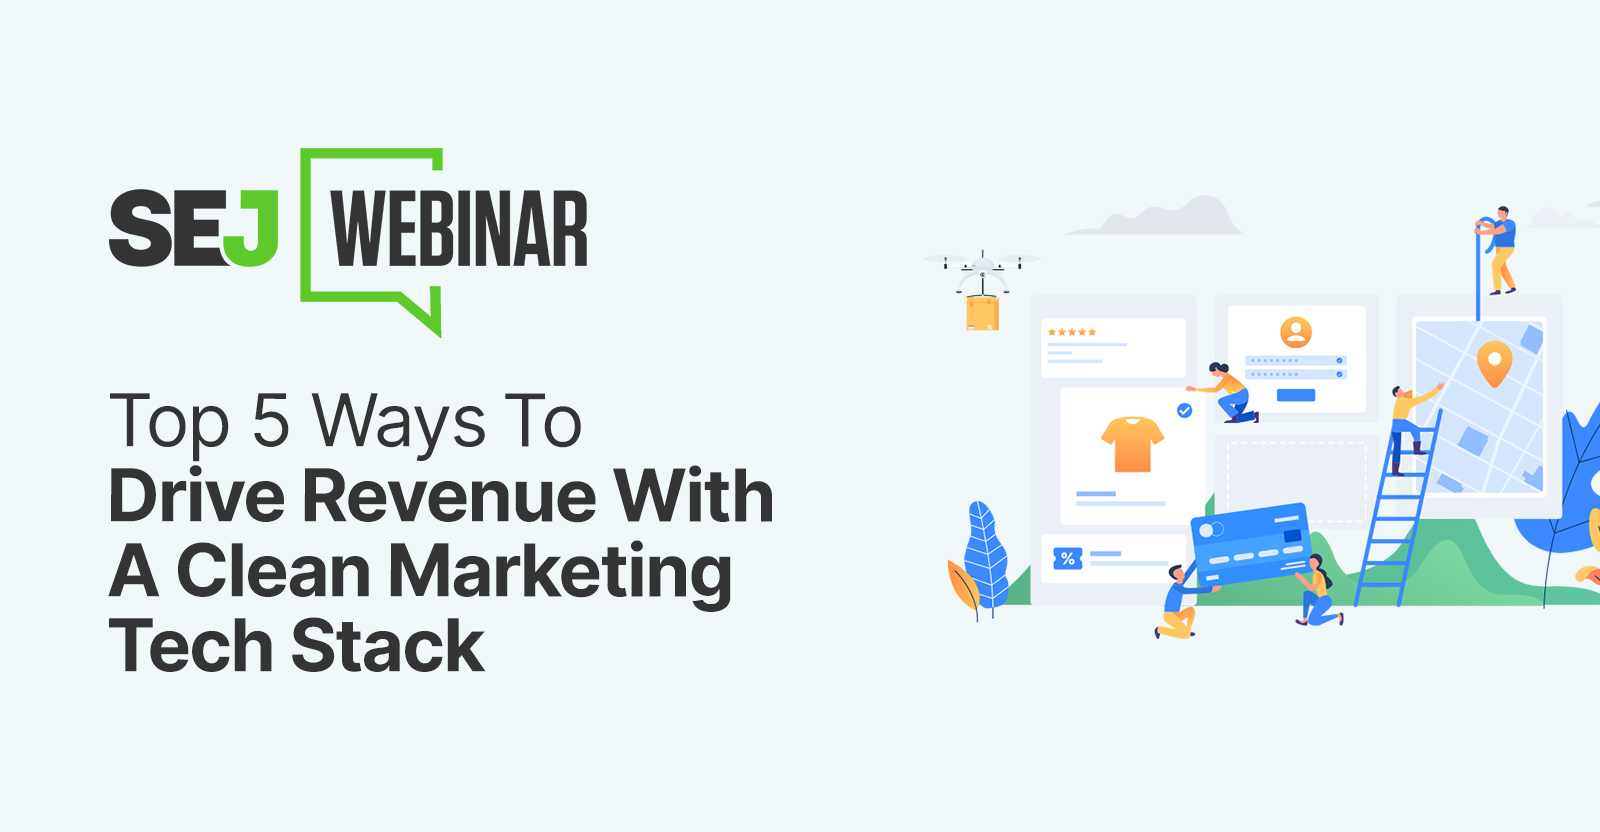 Top 5 Ways To Drive Revenue With A Clean Marketing Tech Stack via @sejournal, @hethr_campbell